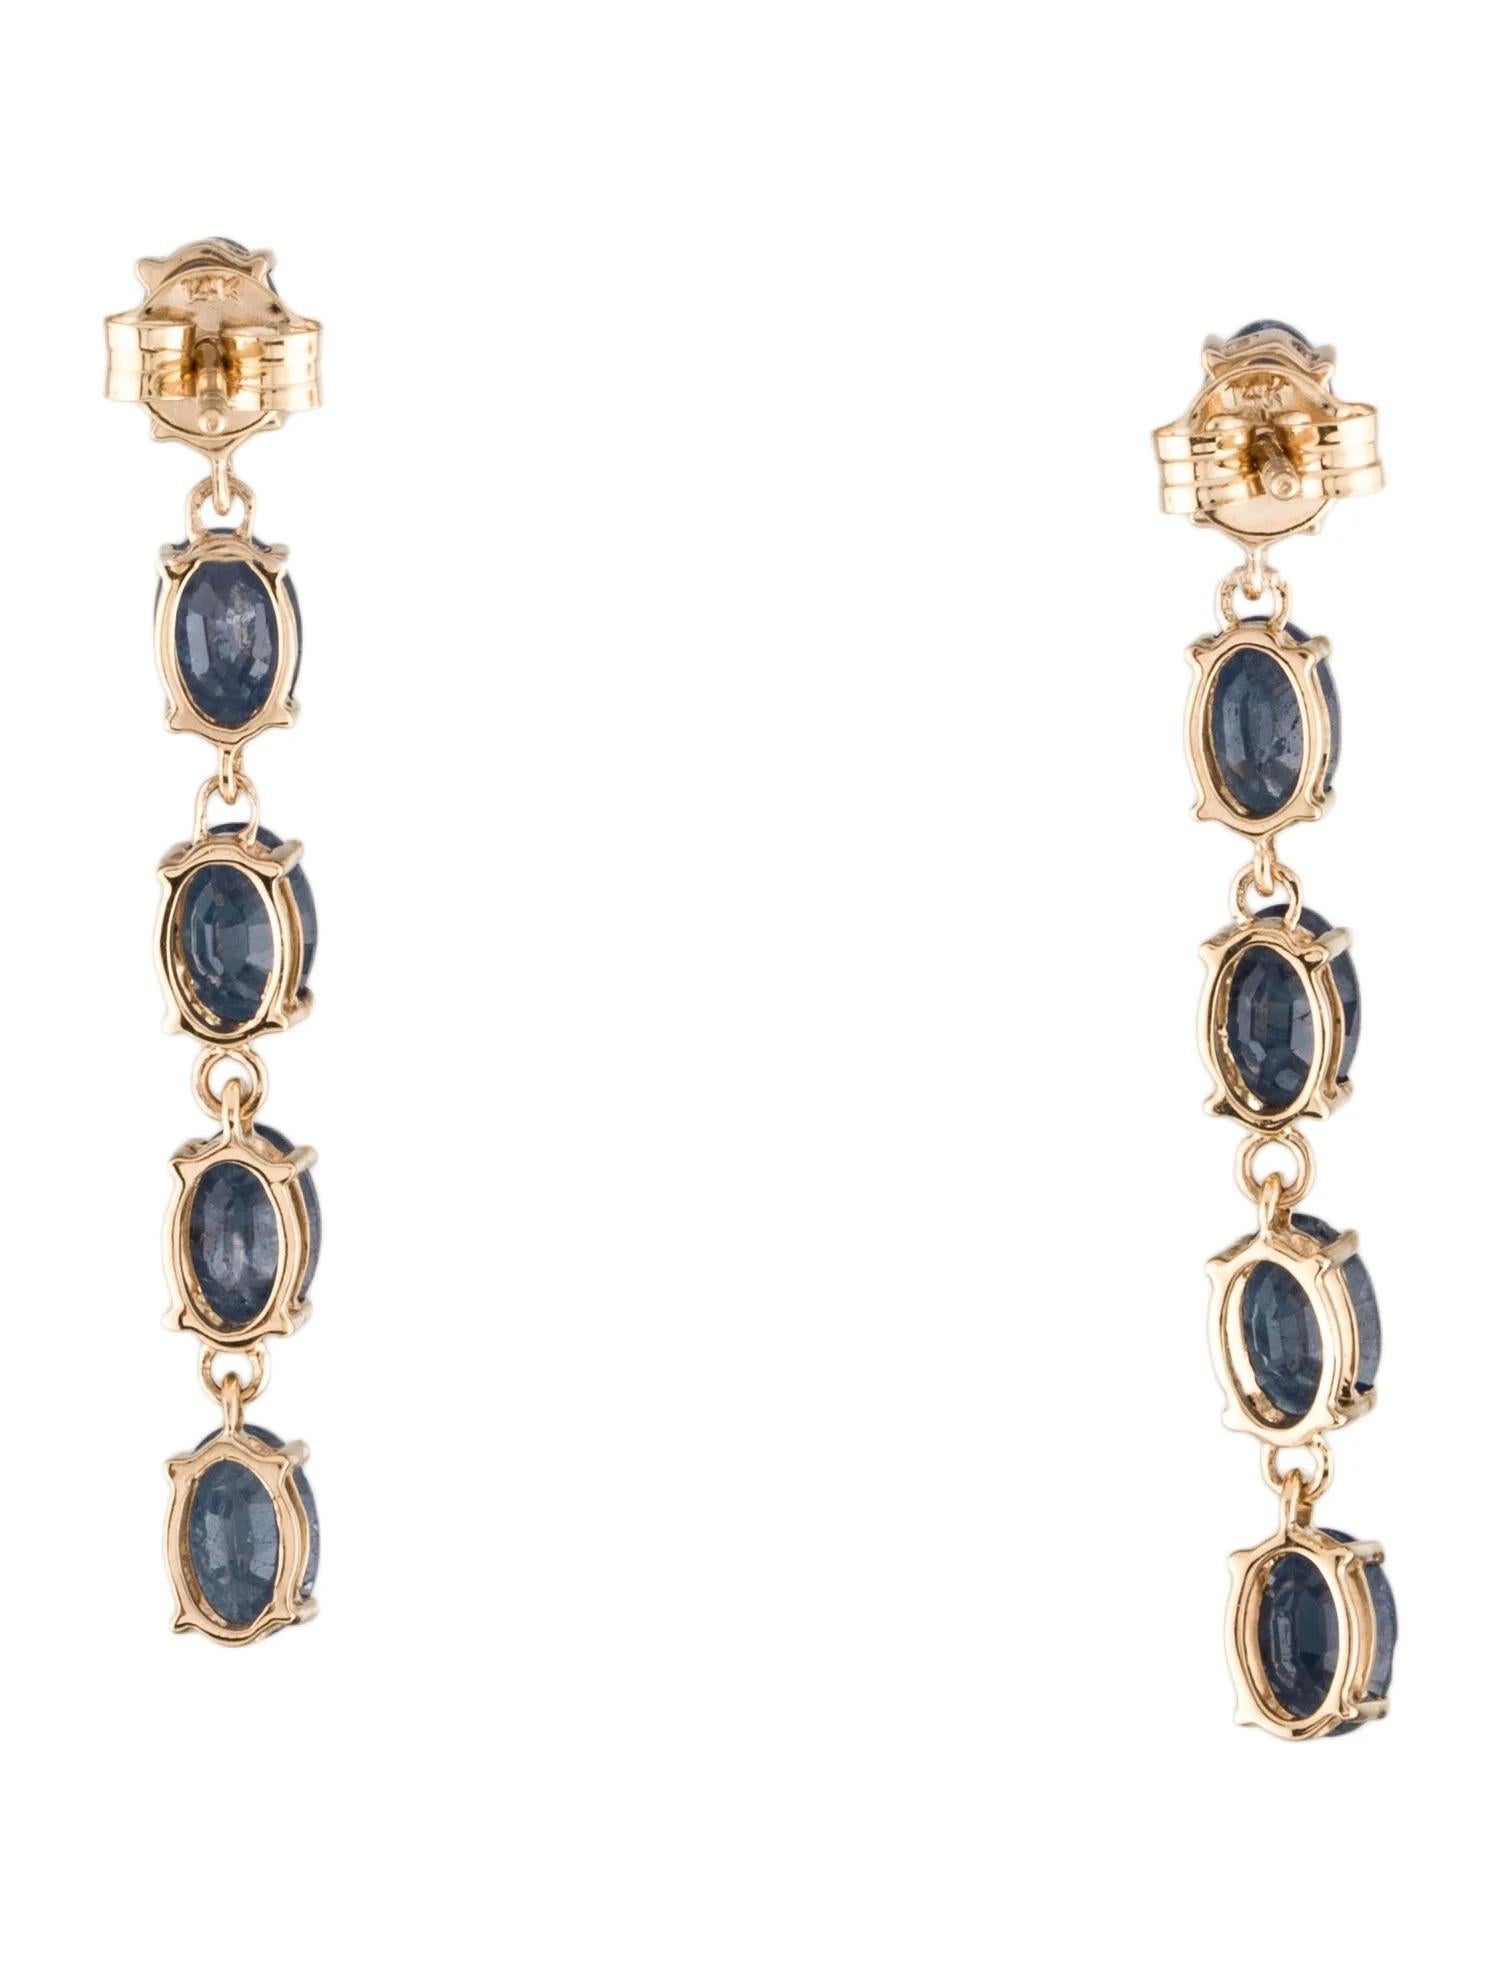 Artist Luxurious 14K Yellow Gold Earrings with 6.11 Carat Oval Brilliant Blue Sapphire For Sale